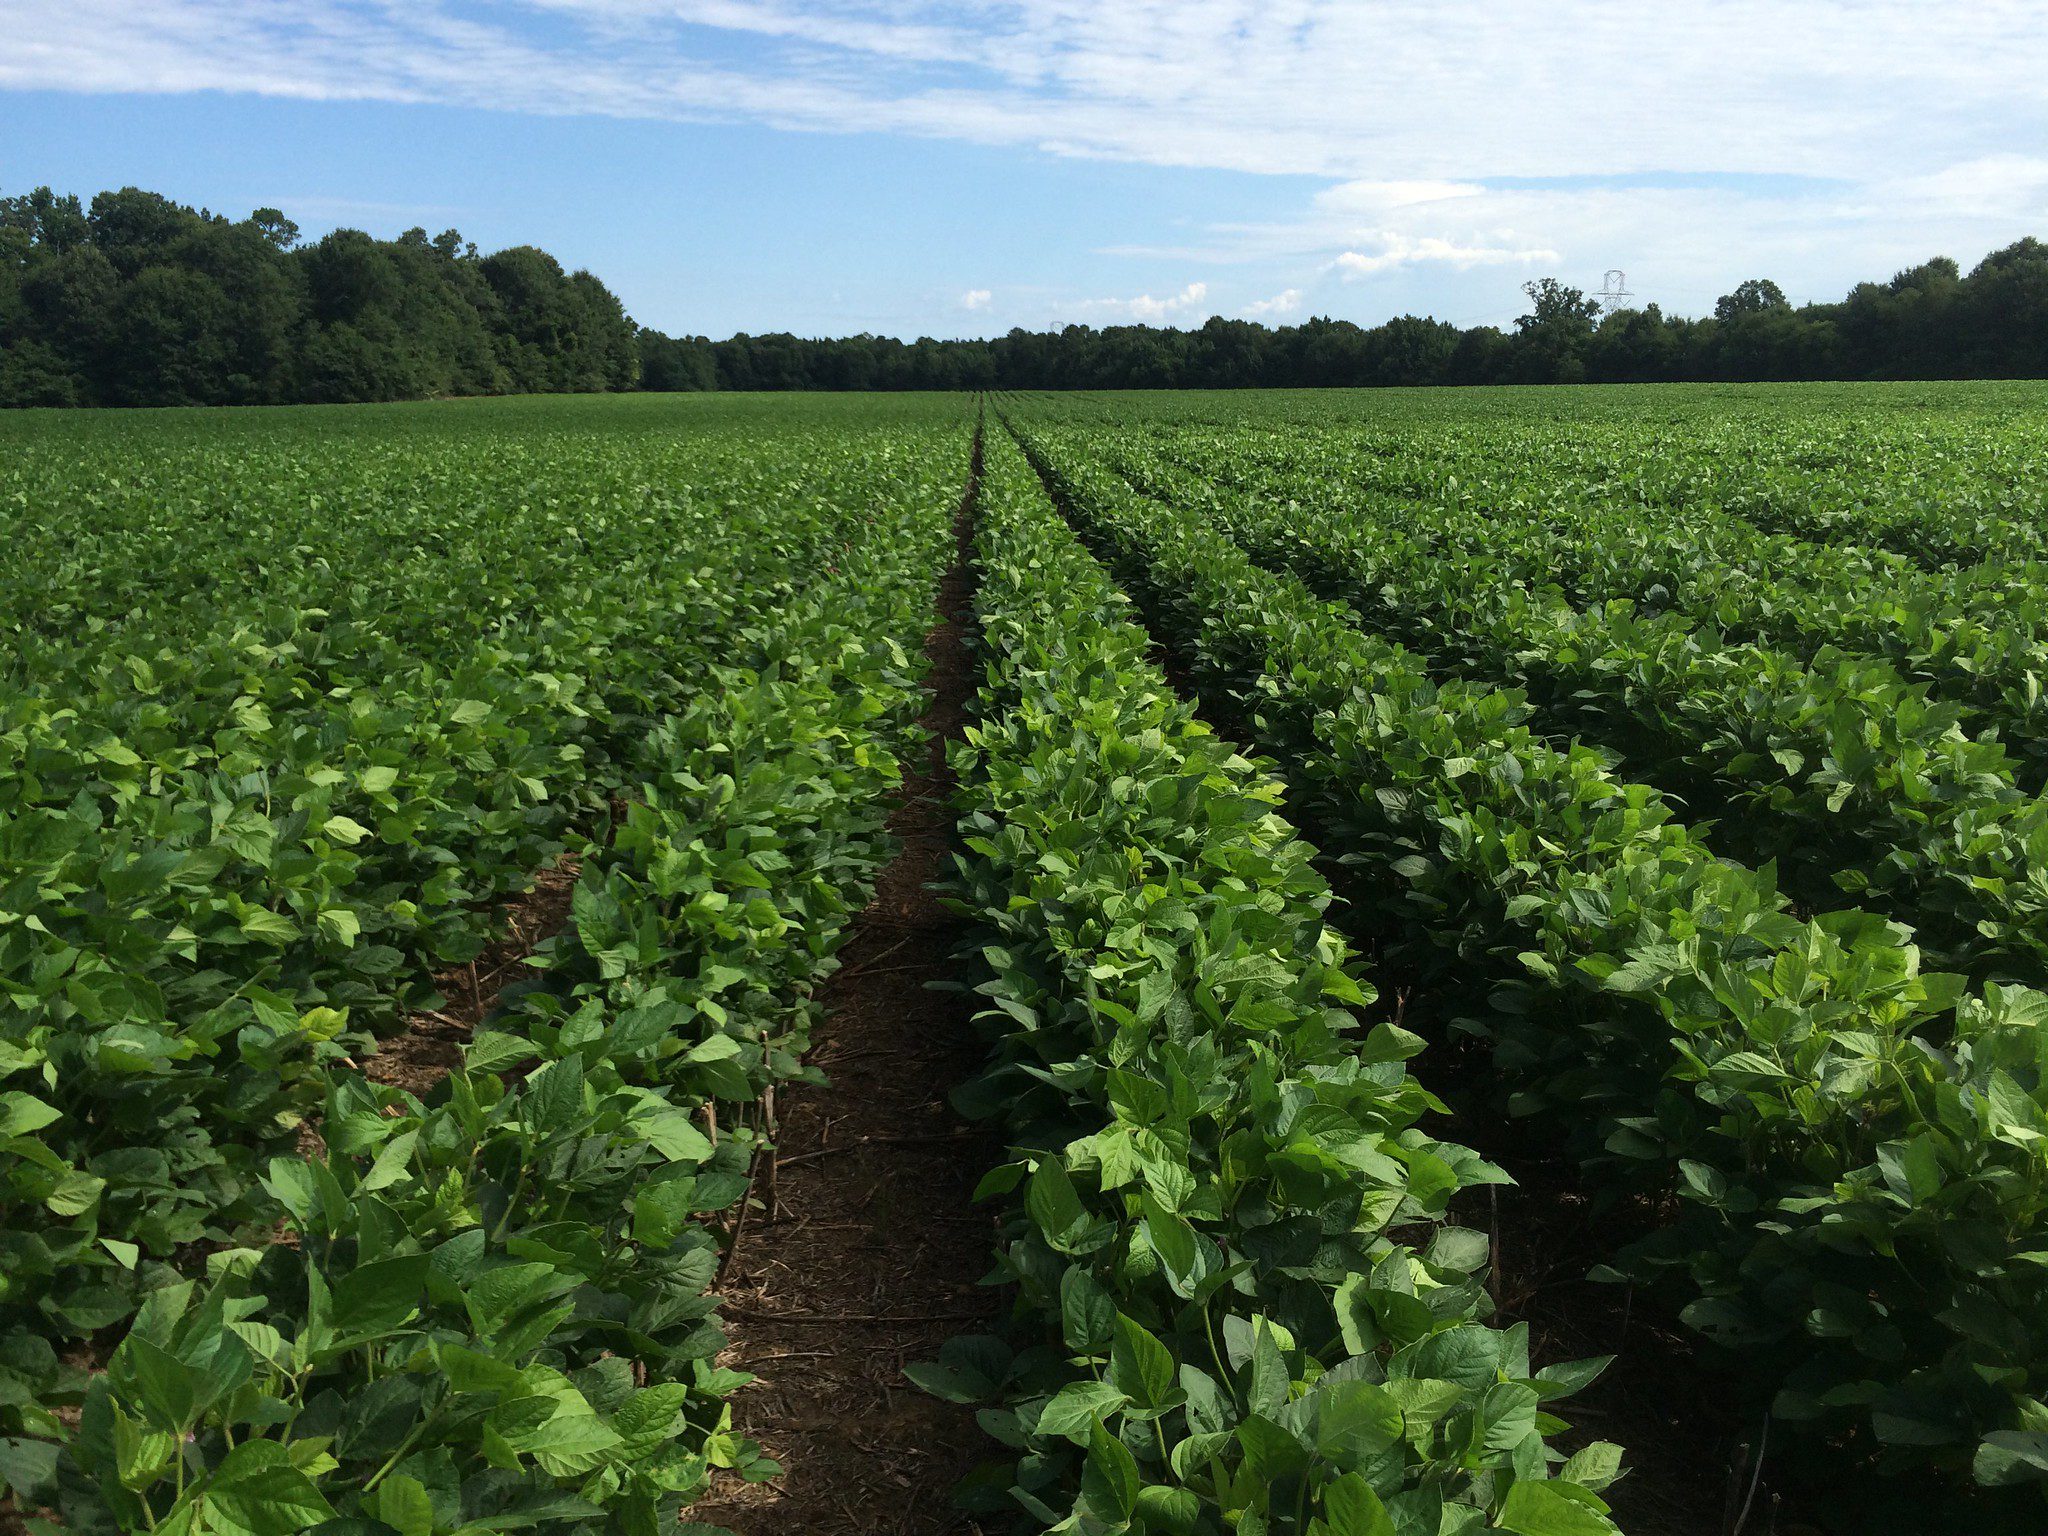 alabama crops update: soybeans